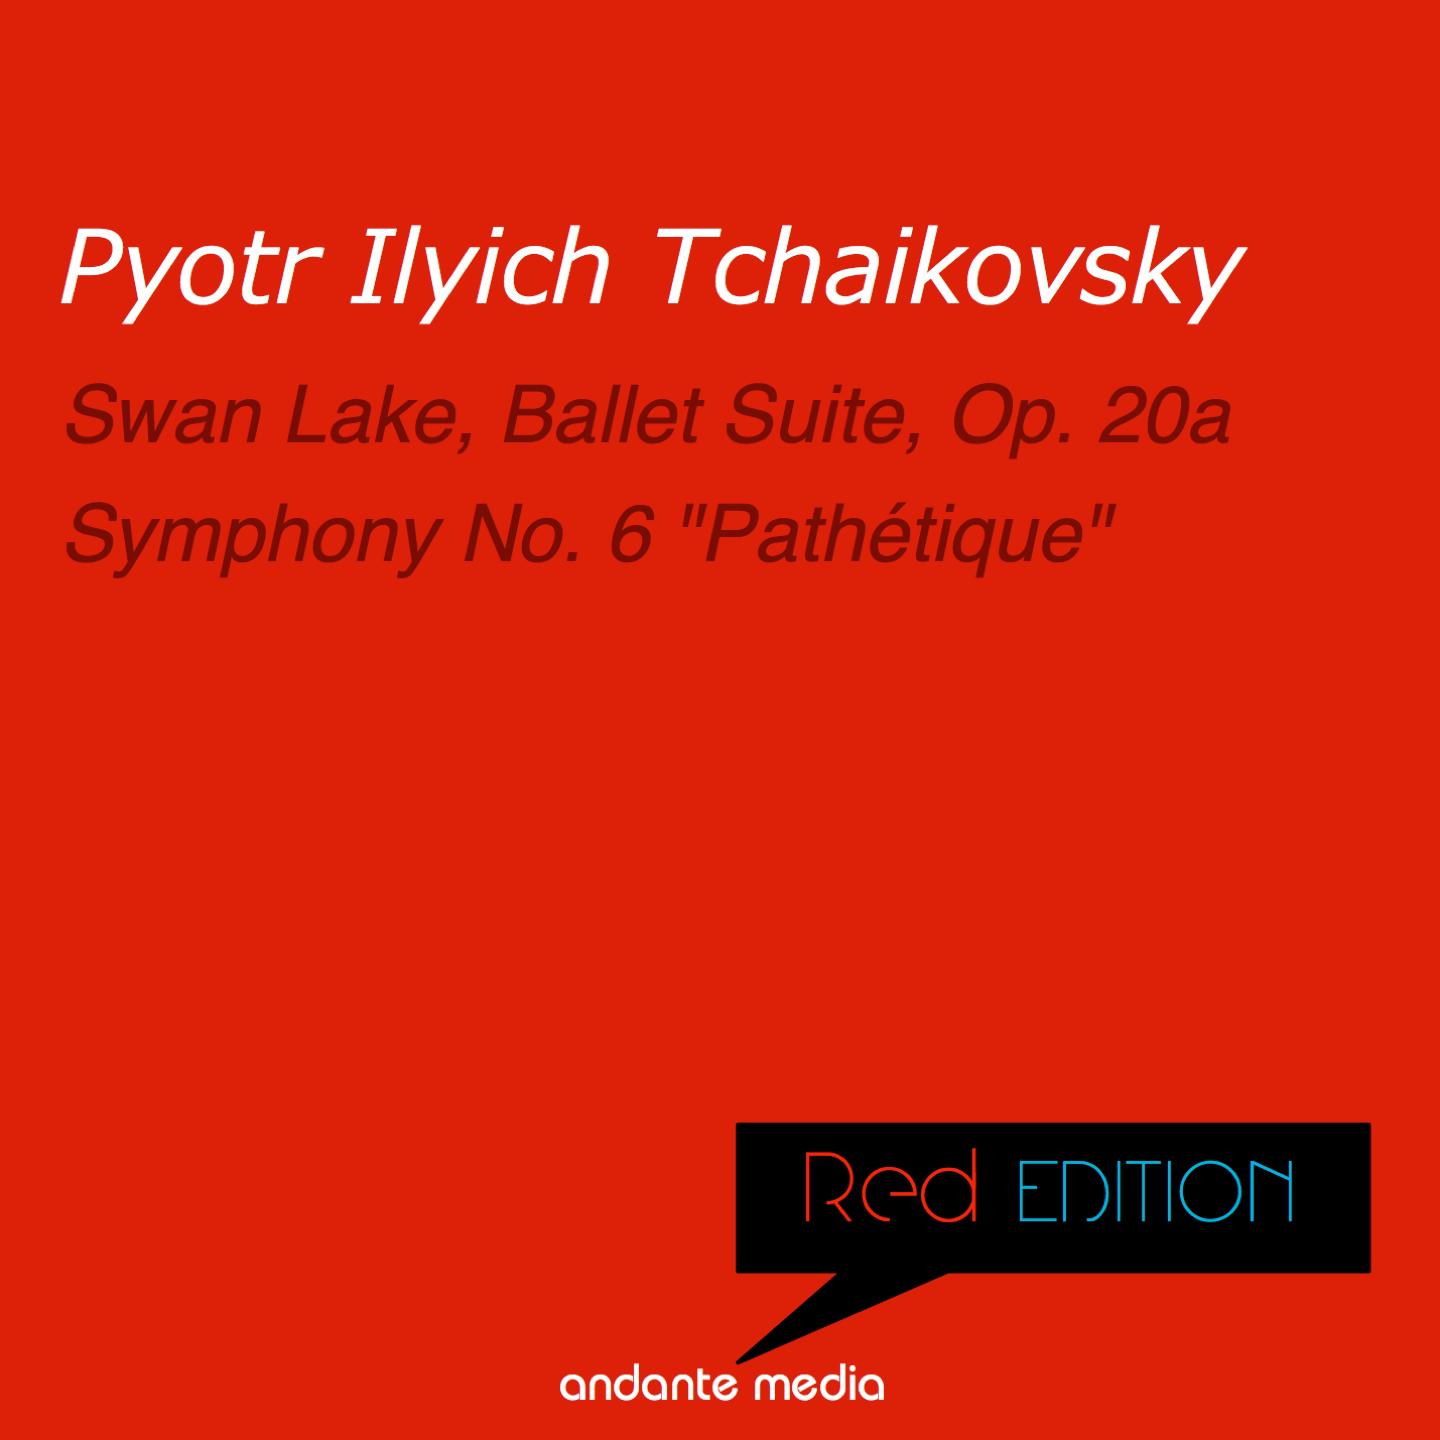 Red Edition  Tchaikovsky: Swan Lake, Ballet Suite, Op. 20a " Pathe tique" Symphony